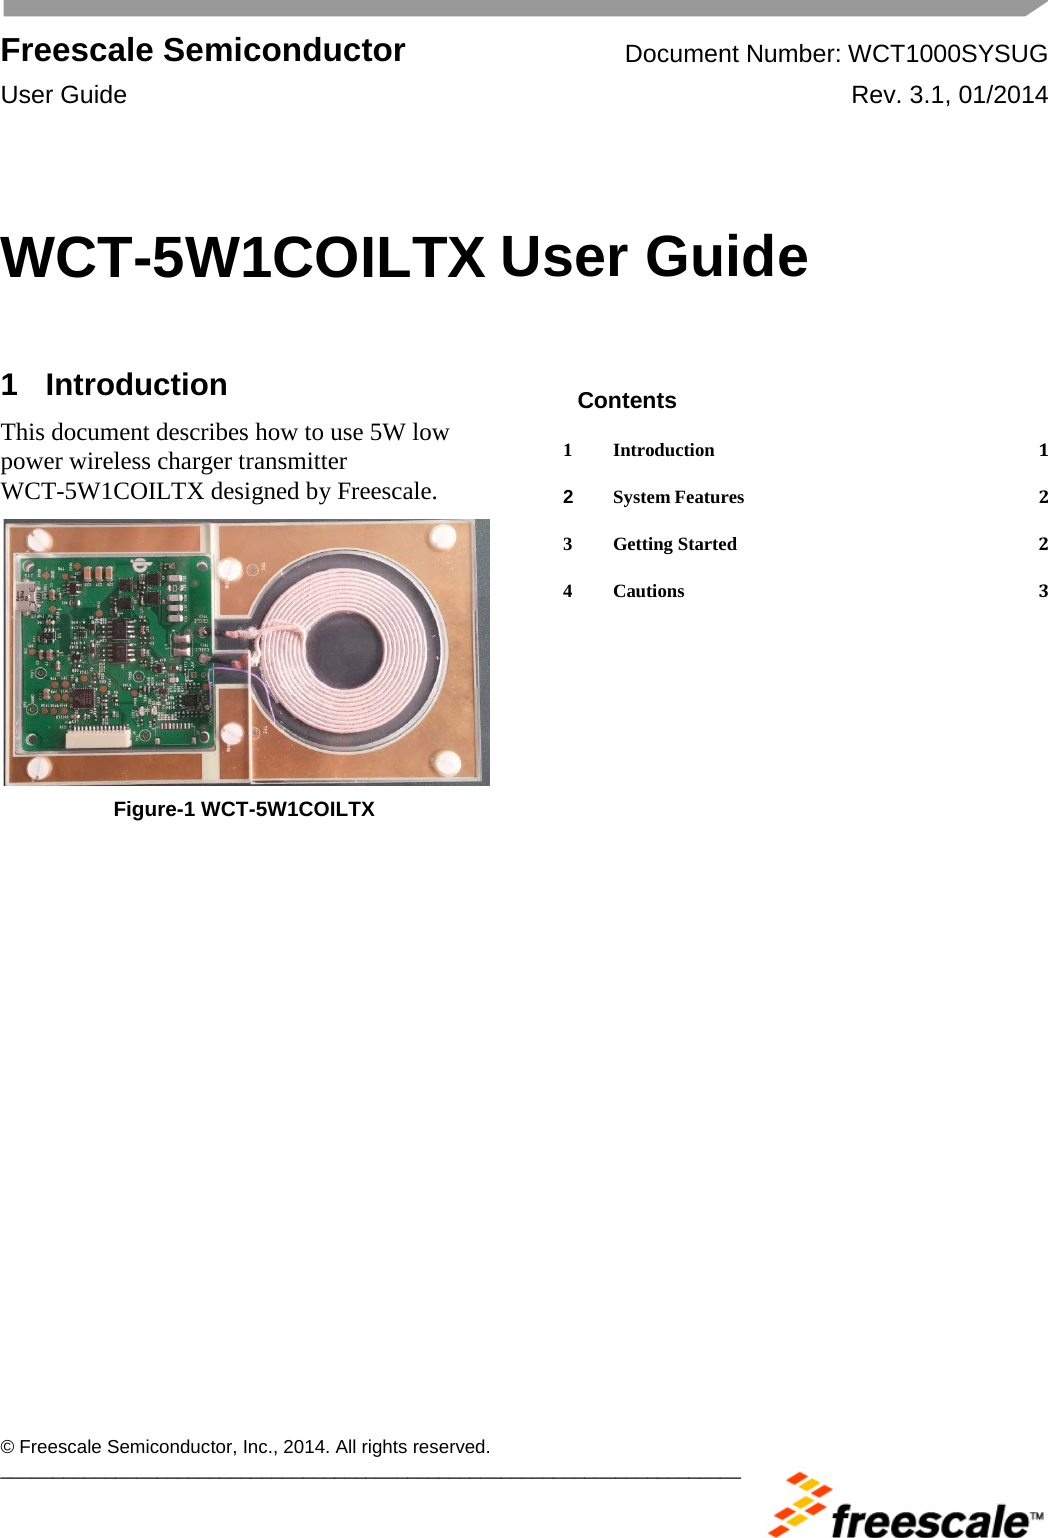  Freescale Semiconductor Document Number: WCT1000SYSUG User Guide Rev. 3.1, 01/2014       © Freescale Semiconductor, Inc., 2014. All rights reserved. _______________________________________________________________________ WCT-5W1COILTX User Guide  1  Introduction This document describes how to use 5W low power wireless charger transmitter WCT-5W1COILTX designed by Freescale.   Figure-1 WCT-5W1COILTX  Contents 1 Introduction  1 2 System Features  2 3 Getting Started  2 4 Cautions  3  